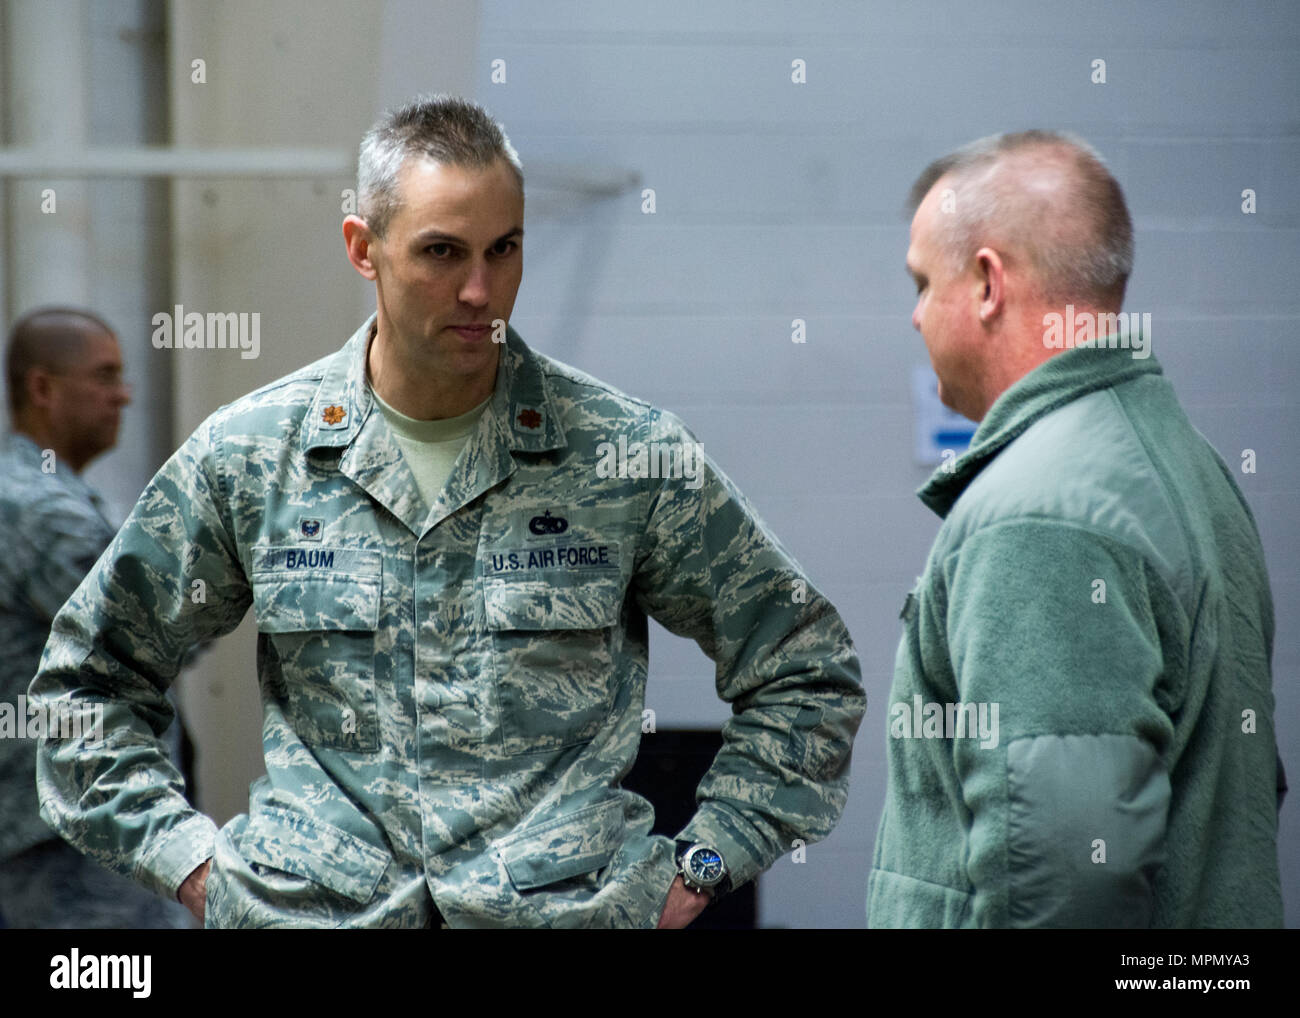 Deployment Chalk High Resolution Stock Photography and Images - Alamy